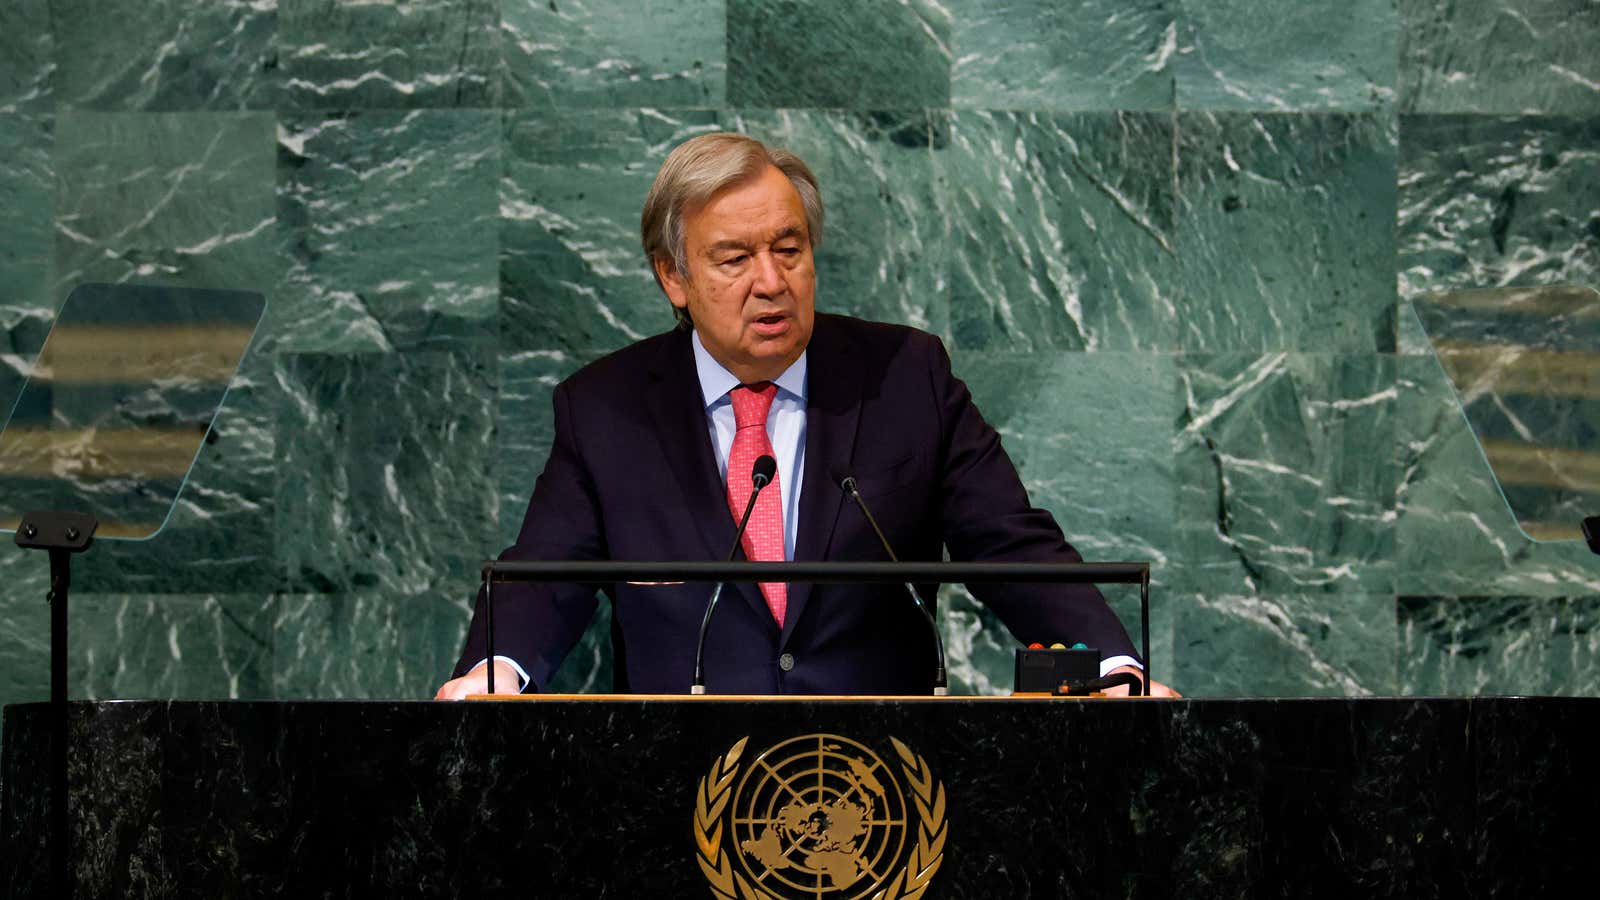 United Nations Secretary General Antonio Guterres speaks during the 77th session of the United Nations General Assembly at the UN headquarters on September 20, 2022 in New York City.